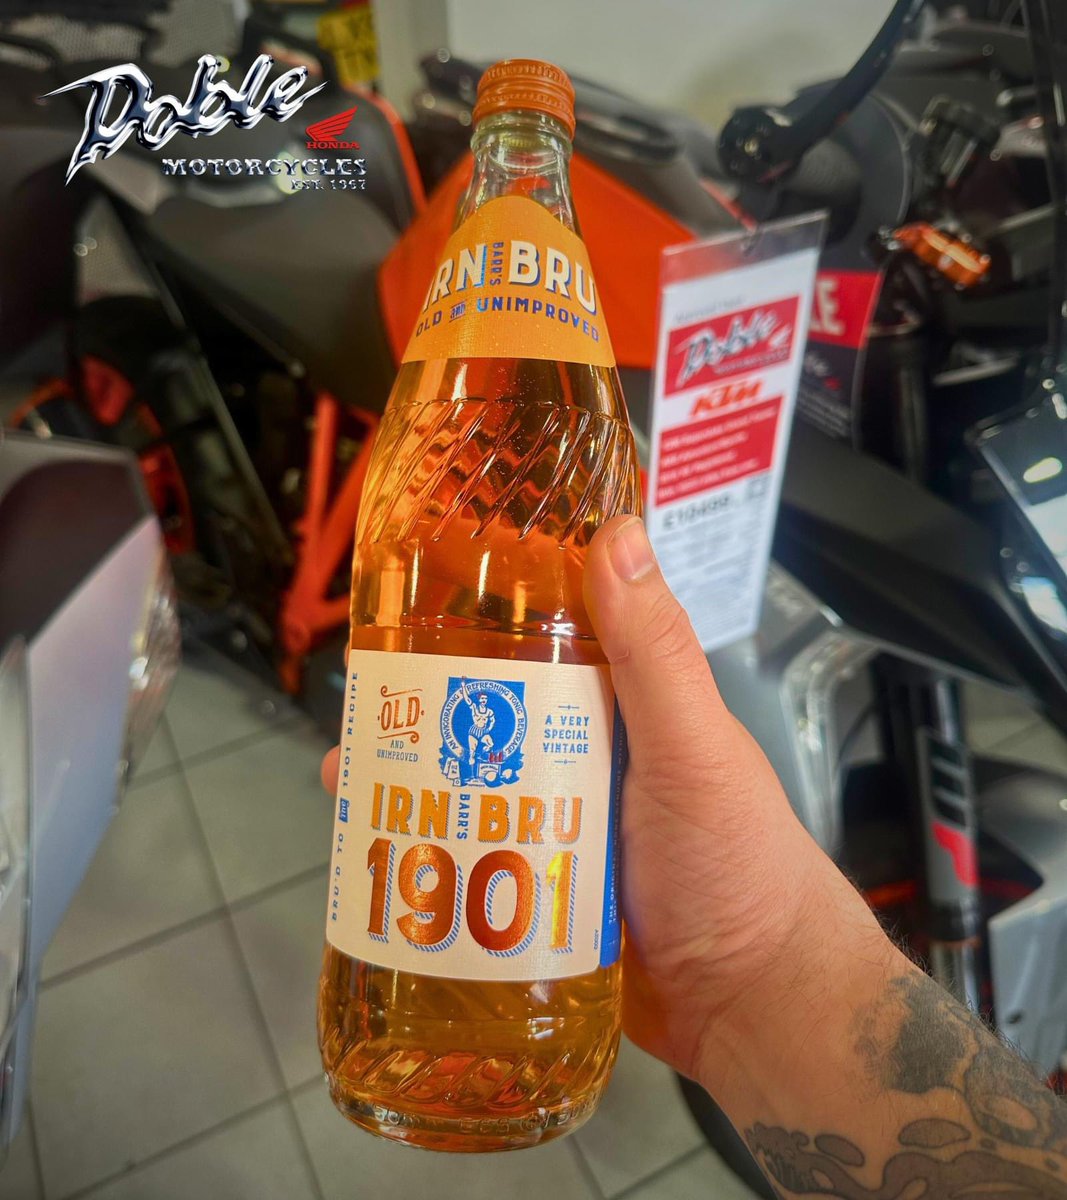 In honour of Phil's homeland and national drink, we are currently offering a free bottle of @irnbru with the purchase of any orange bike! #NotJustKTMs #WeAreBikers